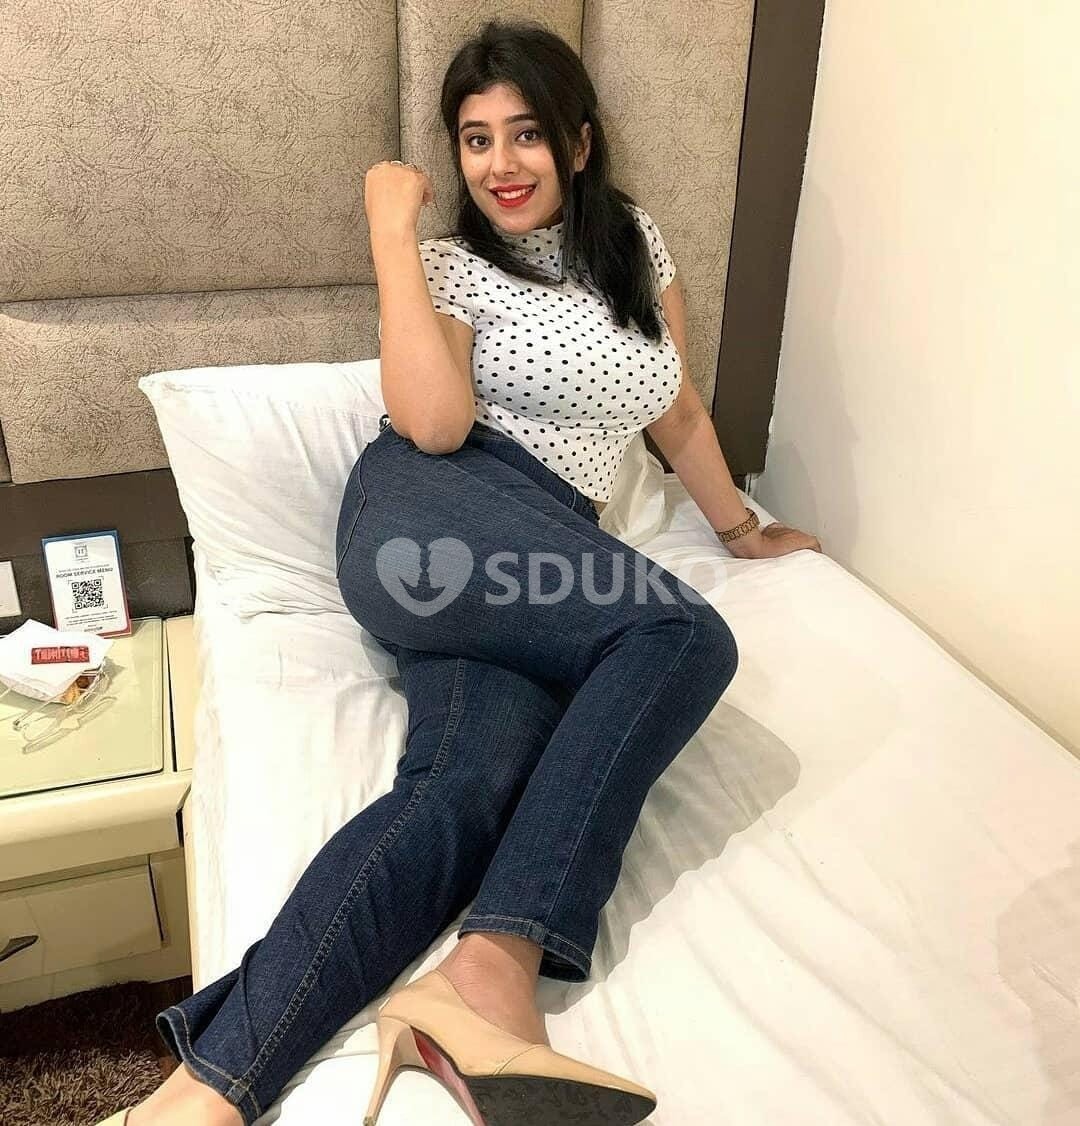 Jaipur ✨☎️ My self Harshita TODAY LOW PRICE 100% SAFE AND SECURE GENUINE SERVICE